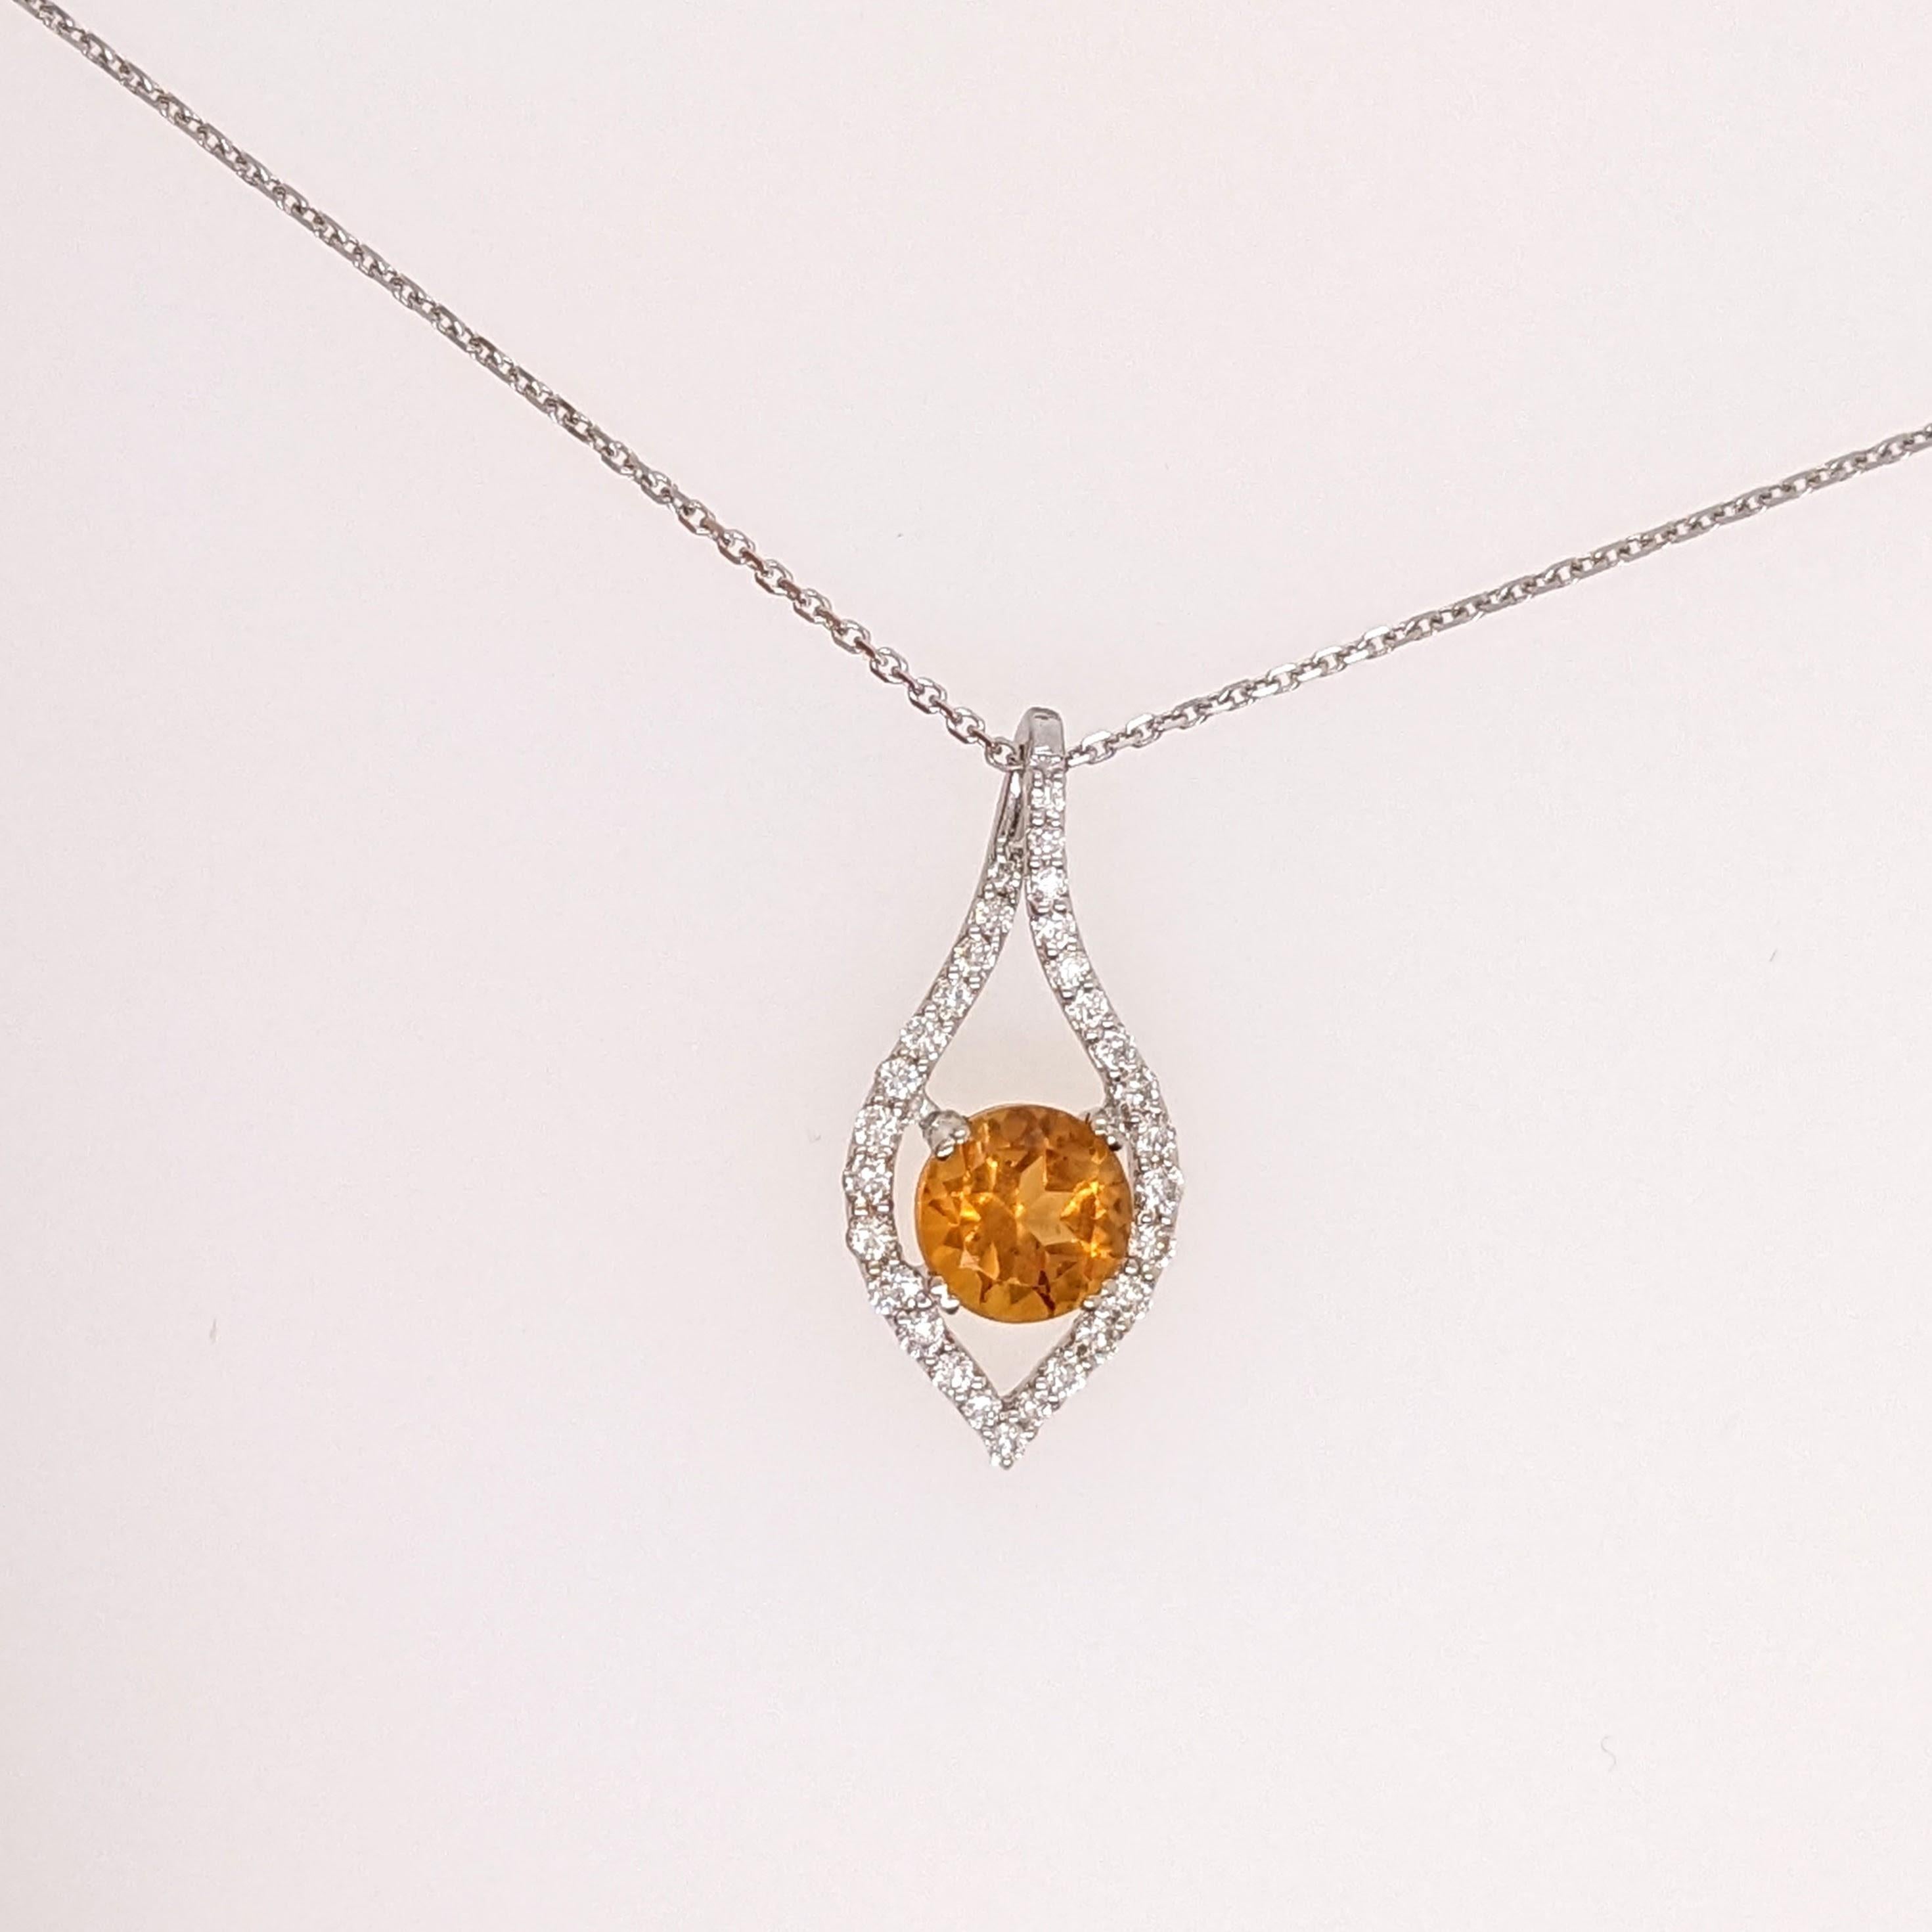 This beautiful pendant features a 0.92 carat round citrine with natural earth mined diamonds, all set in solid 14k gold. A unique pendant design to add to your collection and for everyday wear!

Specifications

Item Type: Pendant
Center